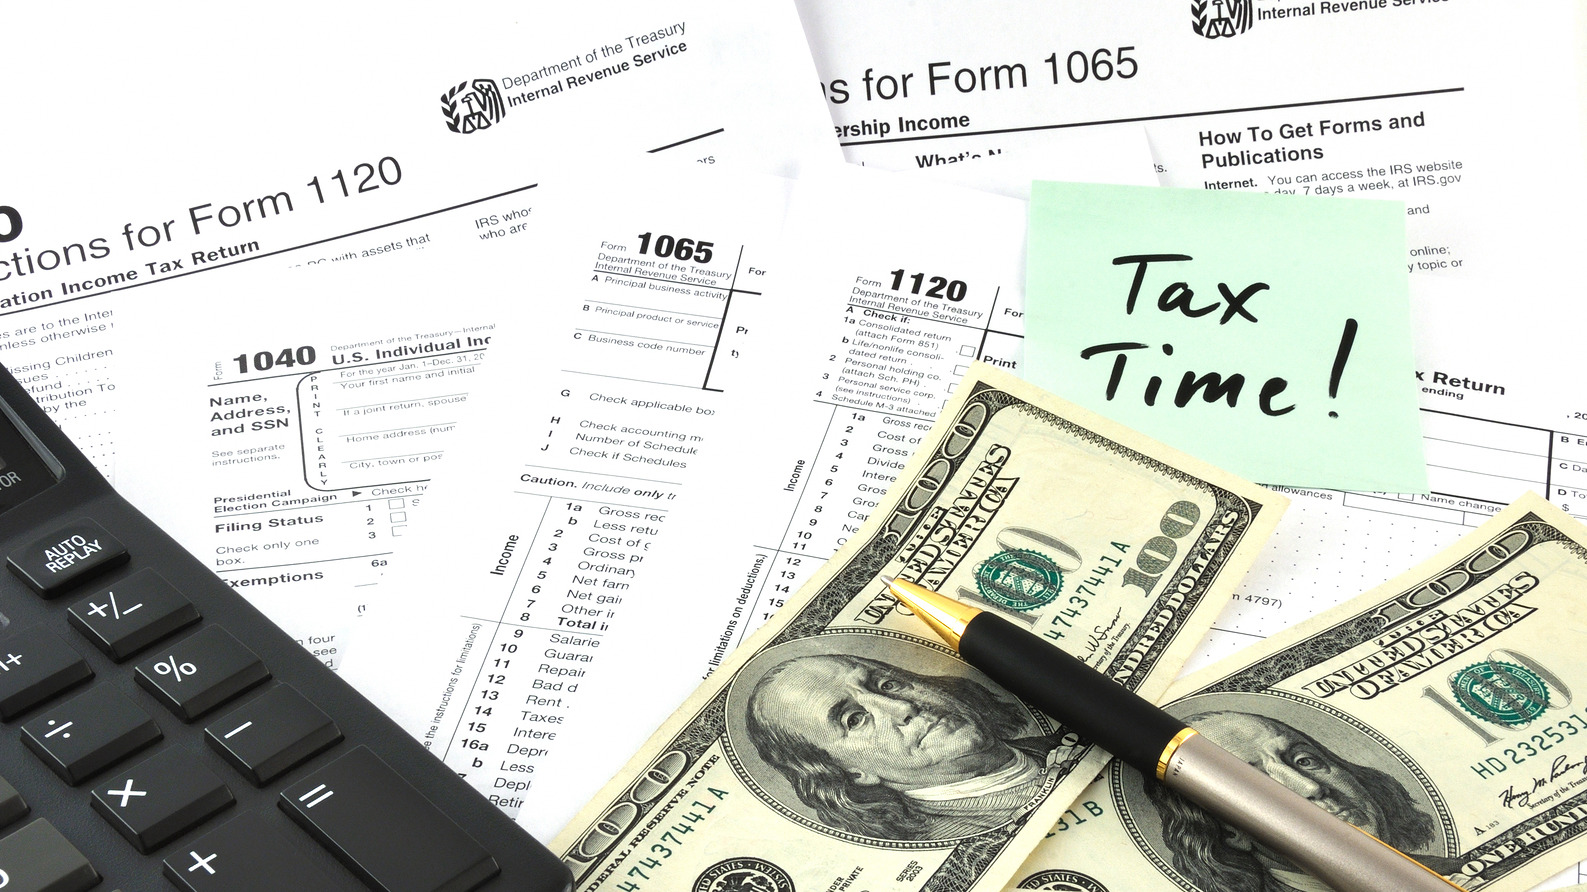 Need your taxes prepared?